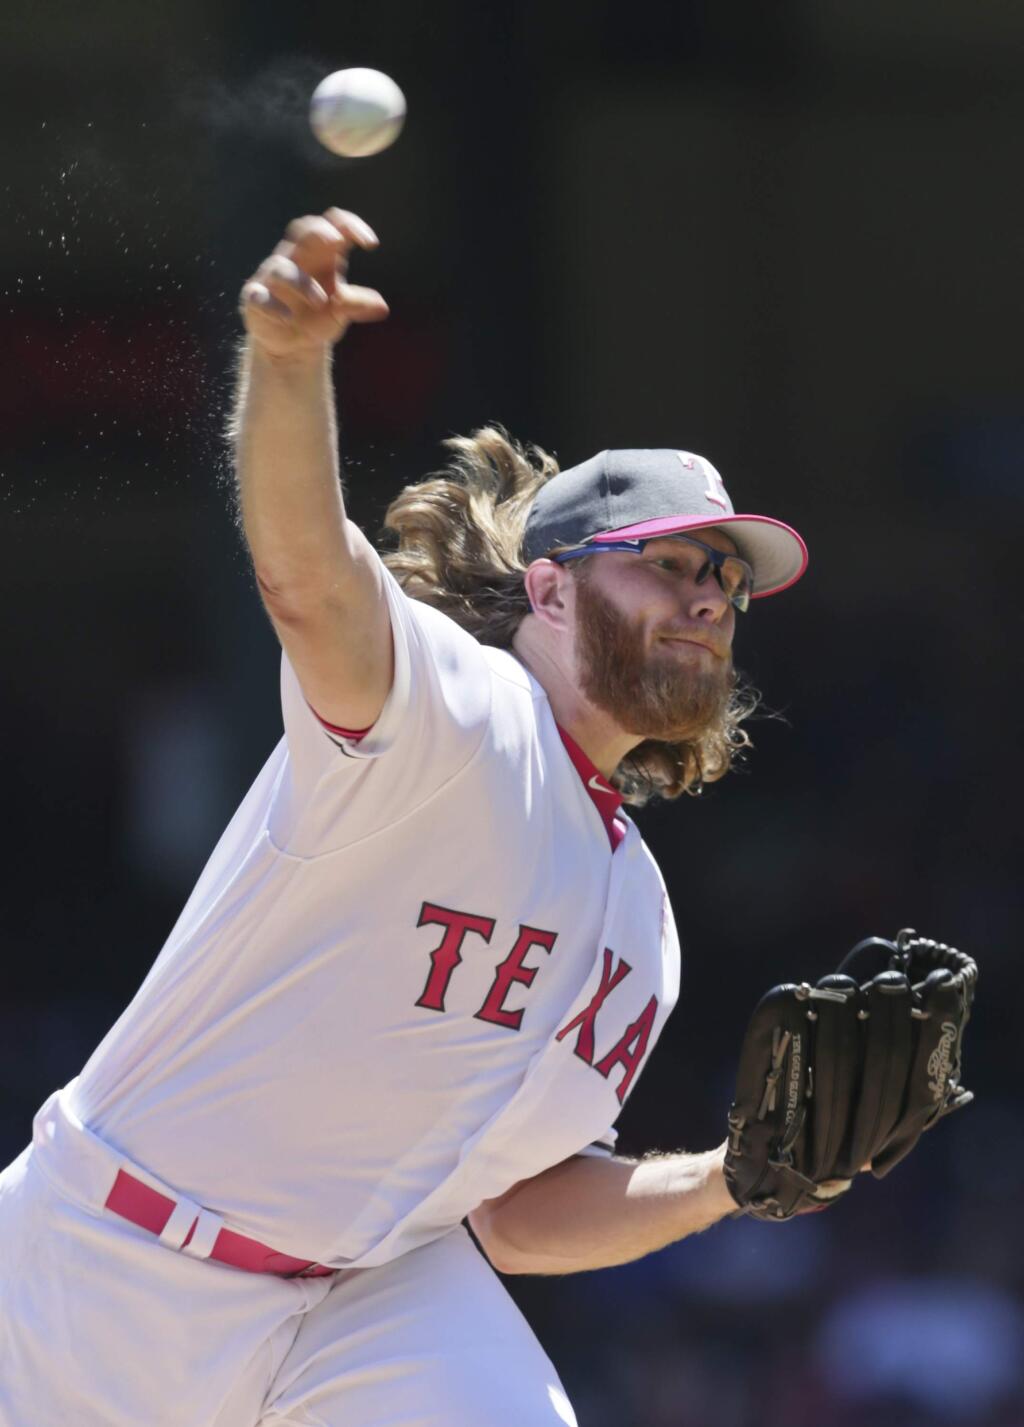 Texas Rangers starting pitcher A.J. Griffin throws during the first inning of a baseball game against the Oakland Athletics in Arlington, Texas, Sunday, May 14, 2017. (AP Photo/LM Otero)